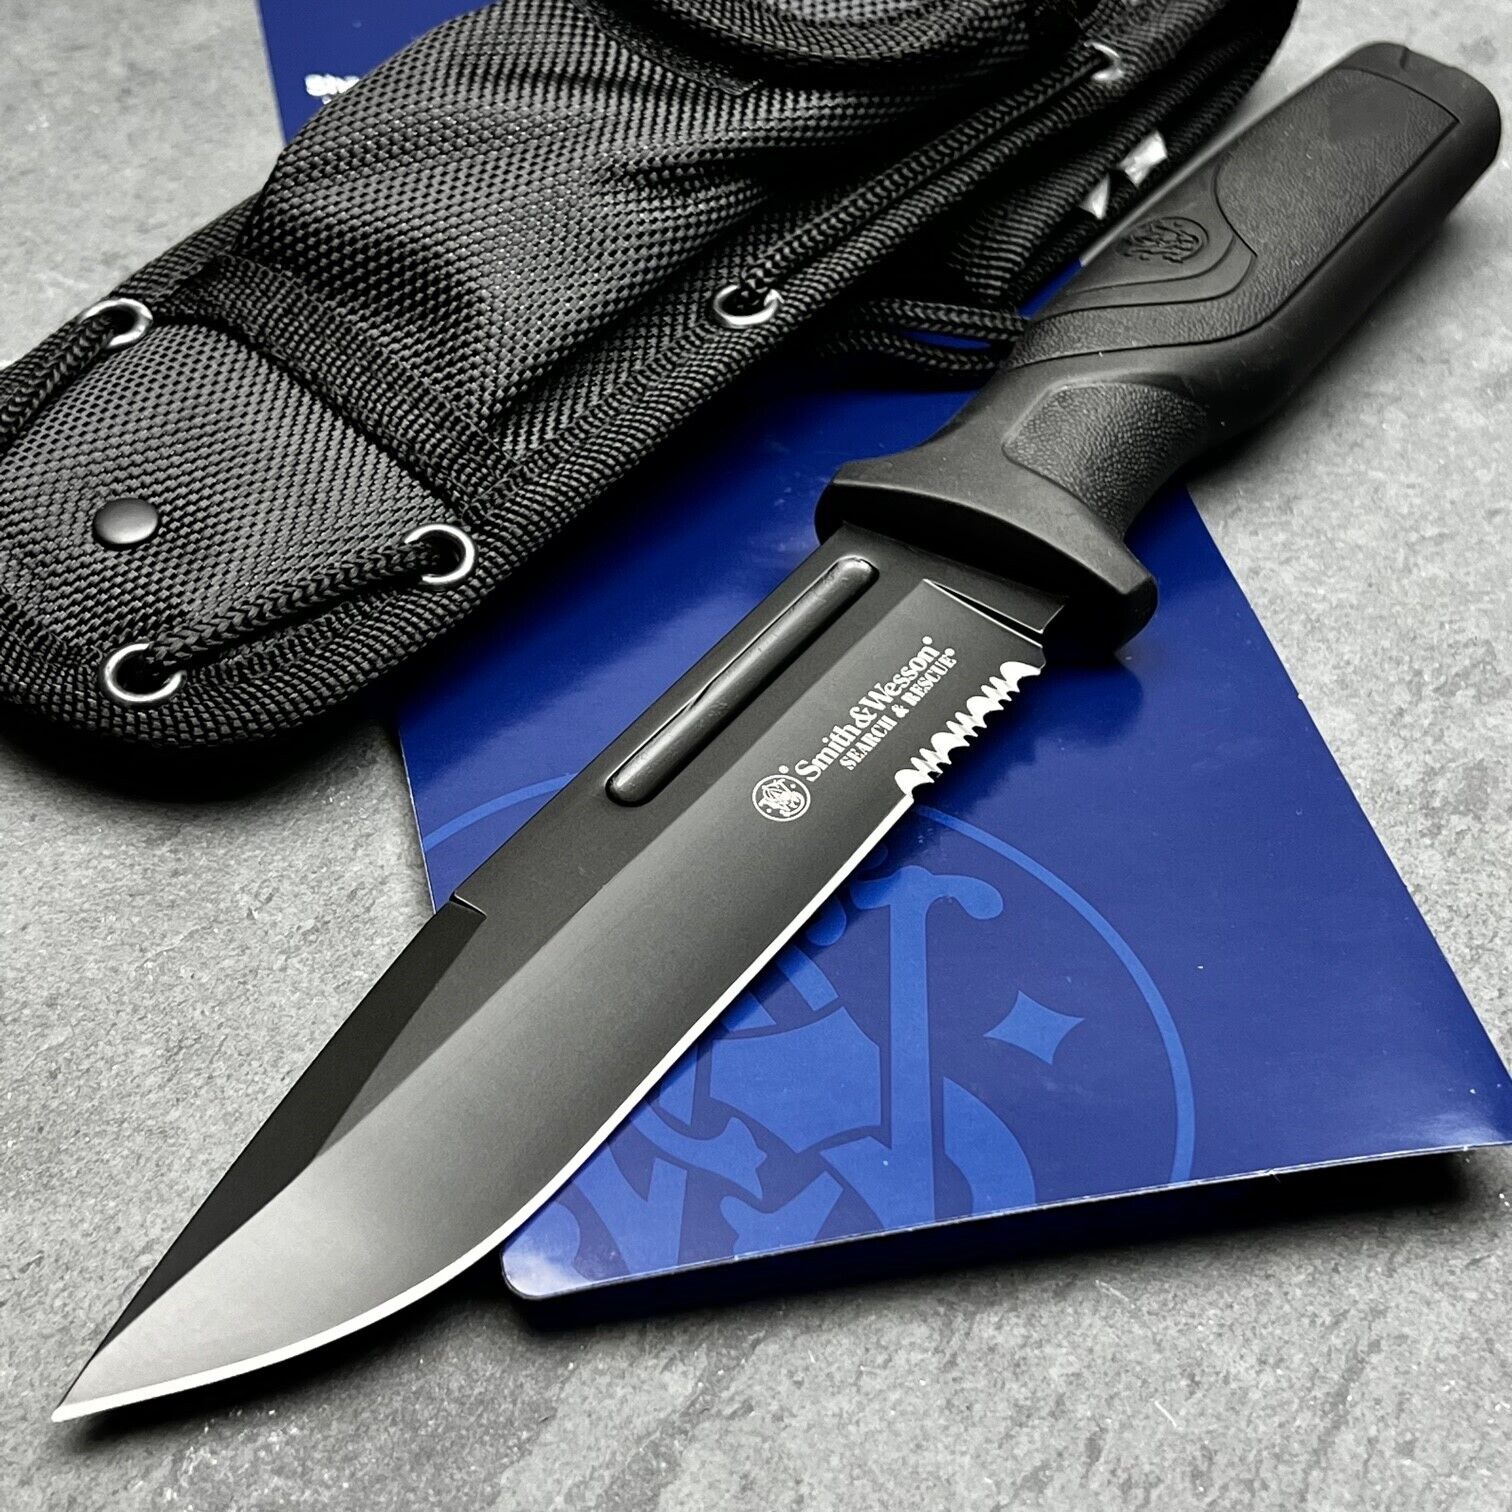 Smith & Wesson Large Search Rescue Tactical Black Fixed Blade Sheath Sharpener